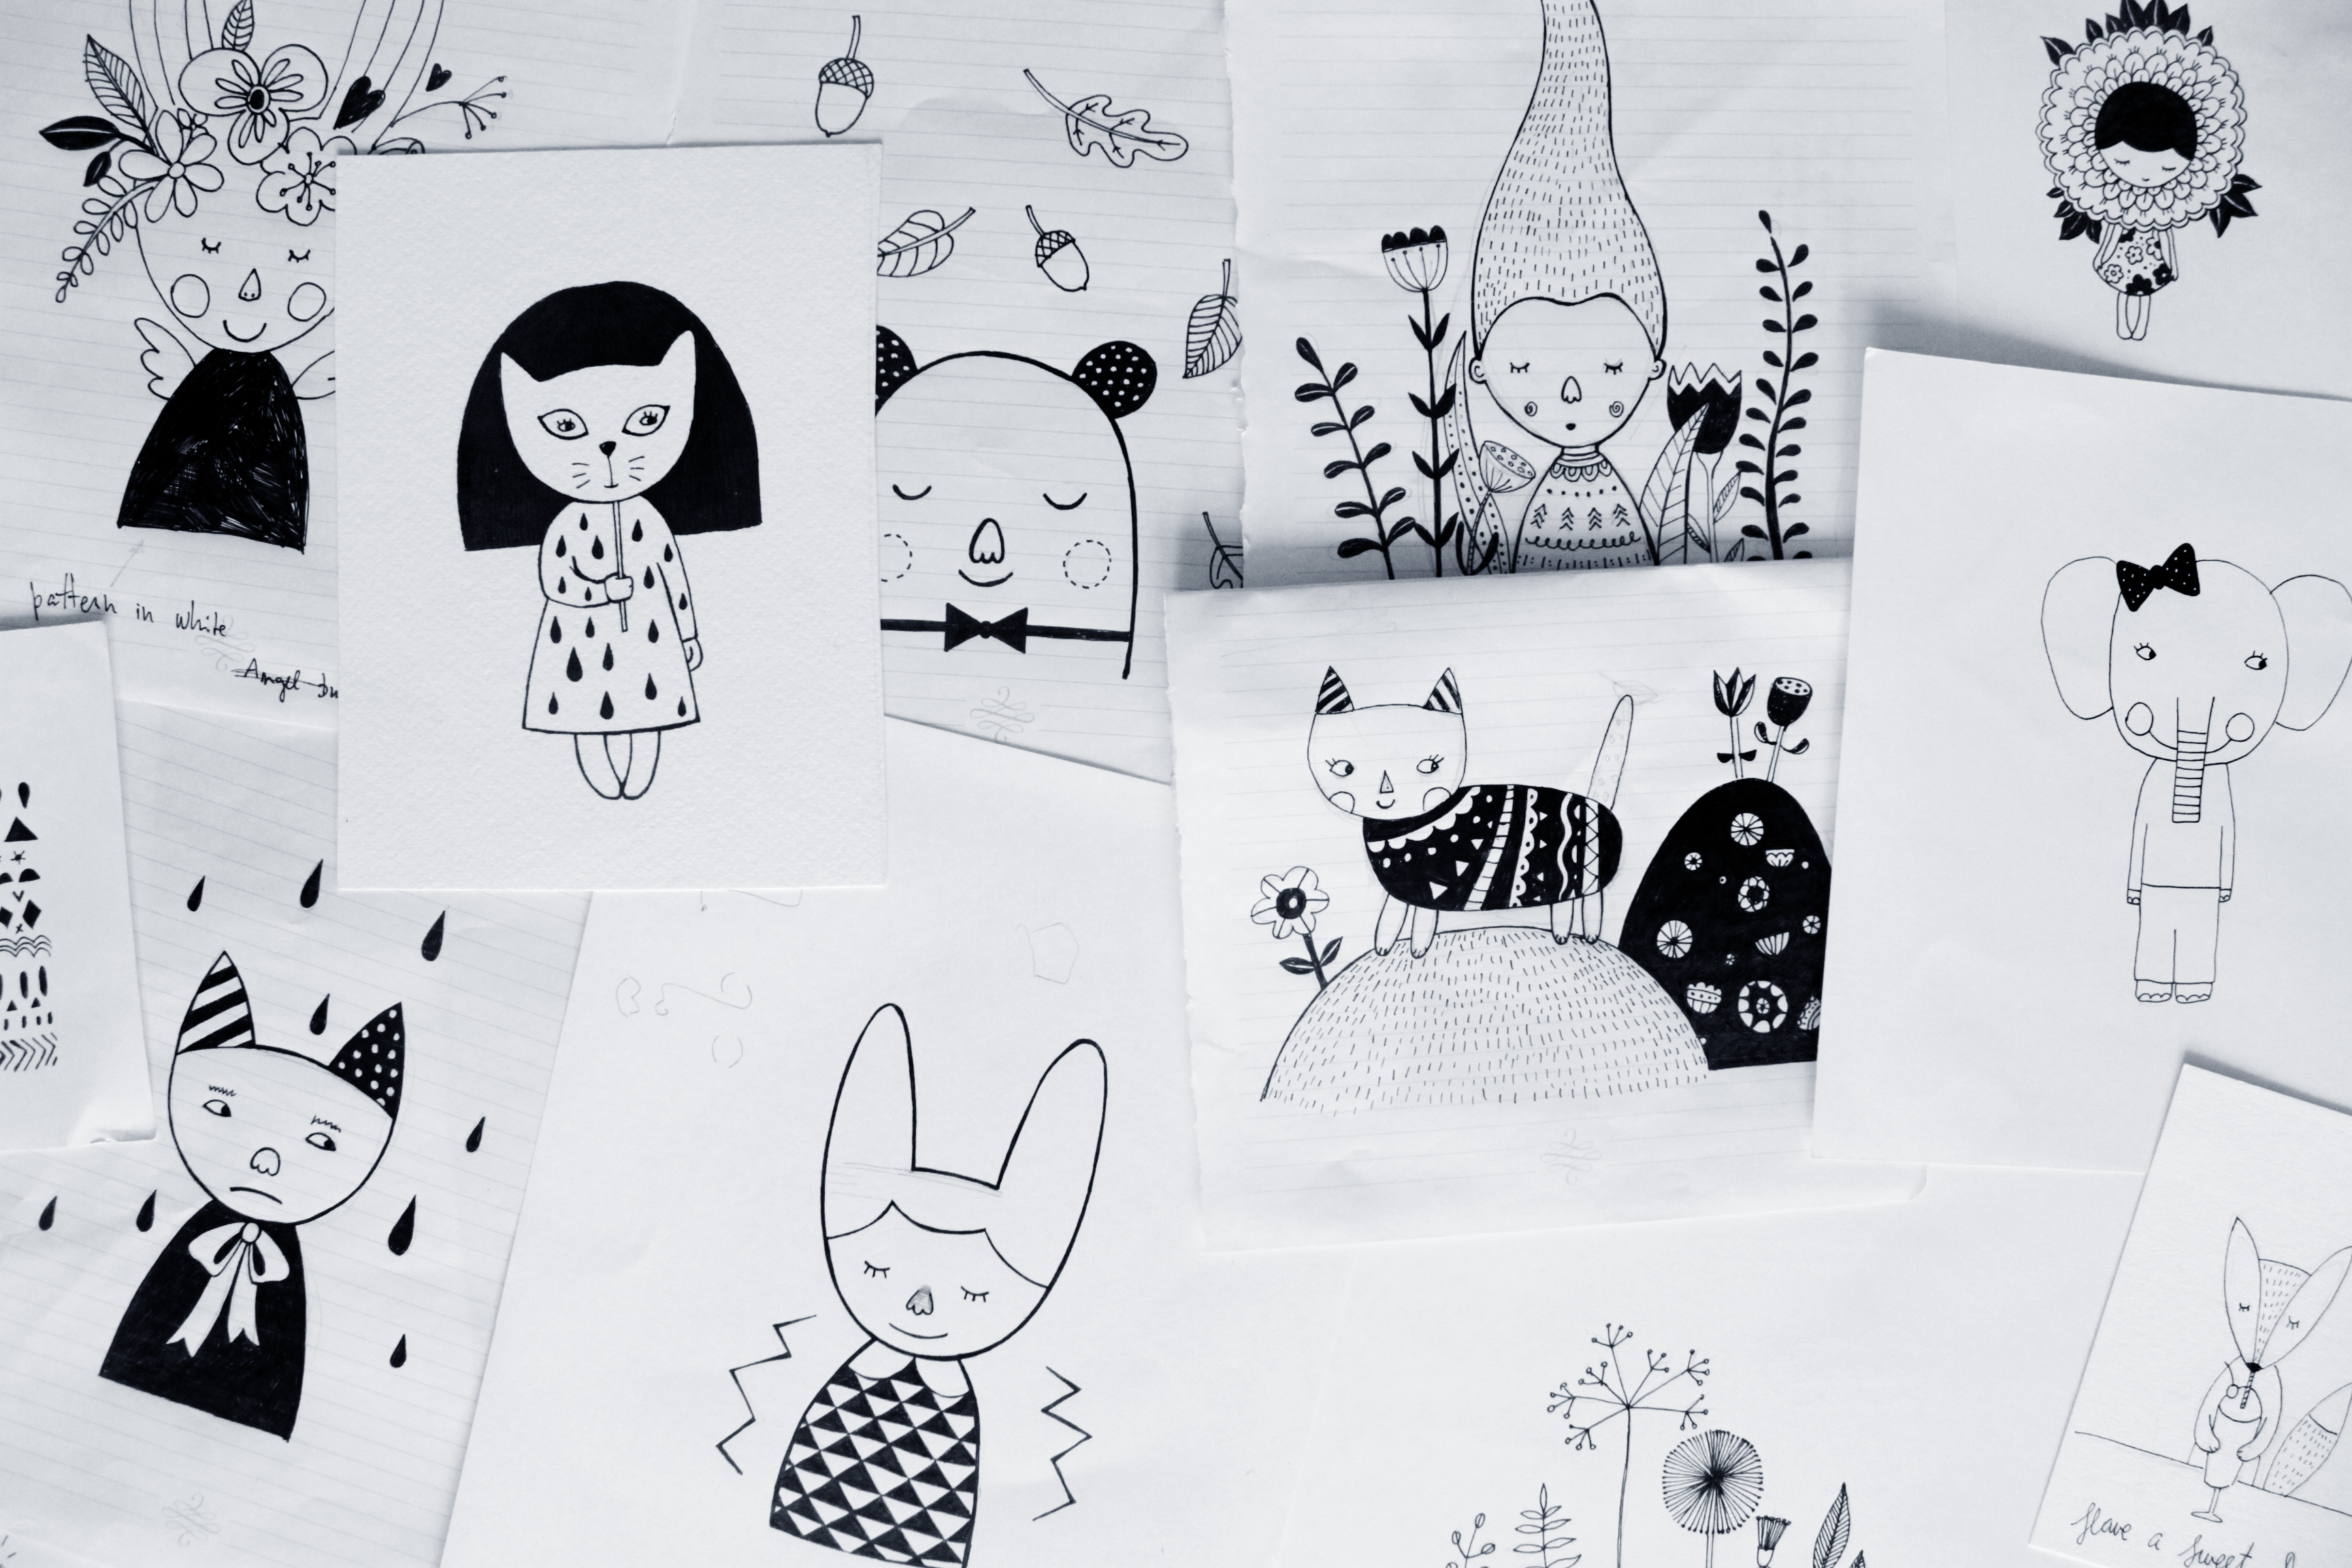 Some of Egle's charming sketches, that she sells online as downloadables and prints 